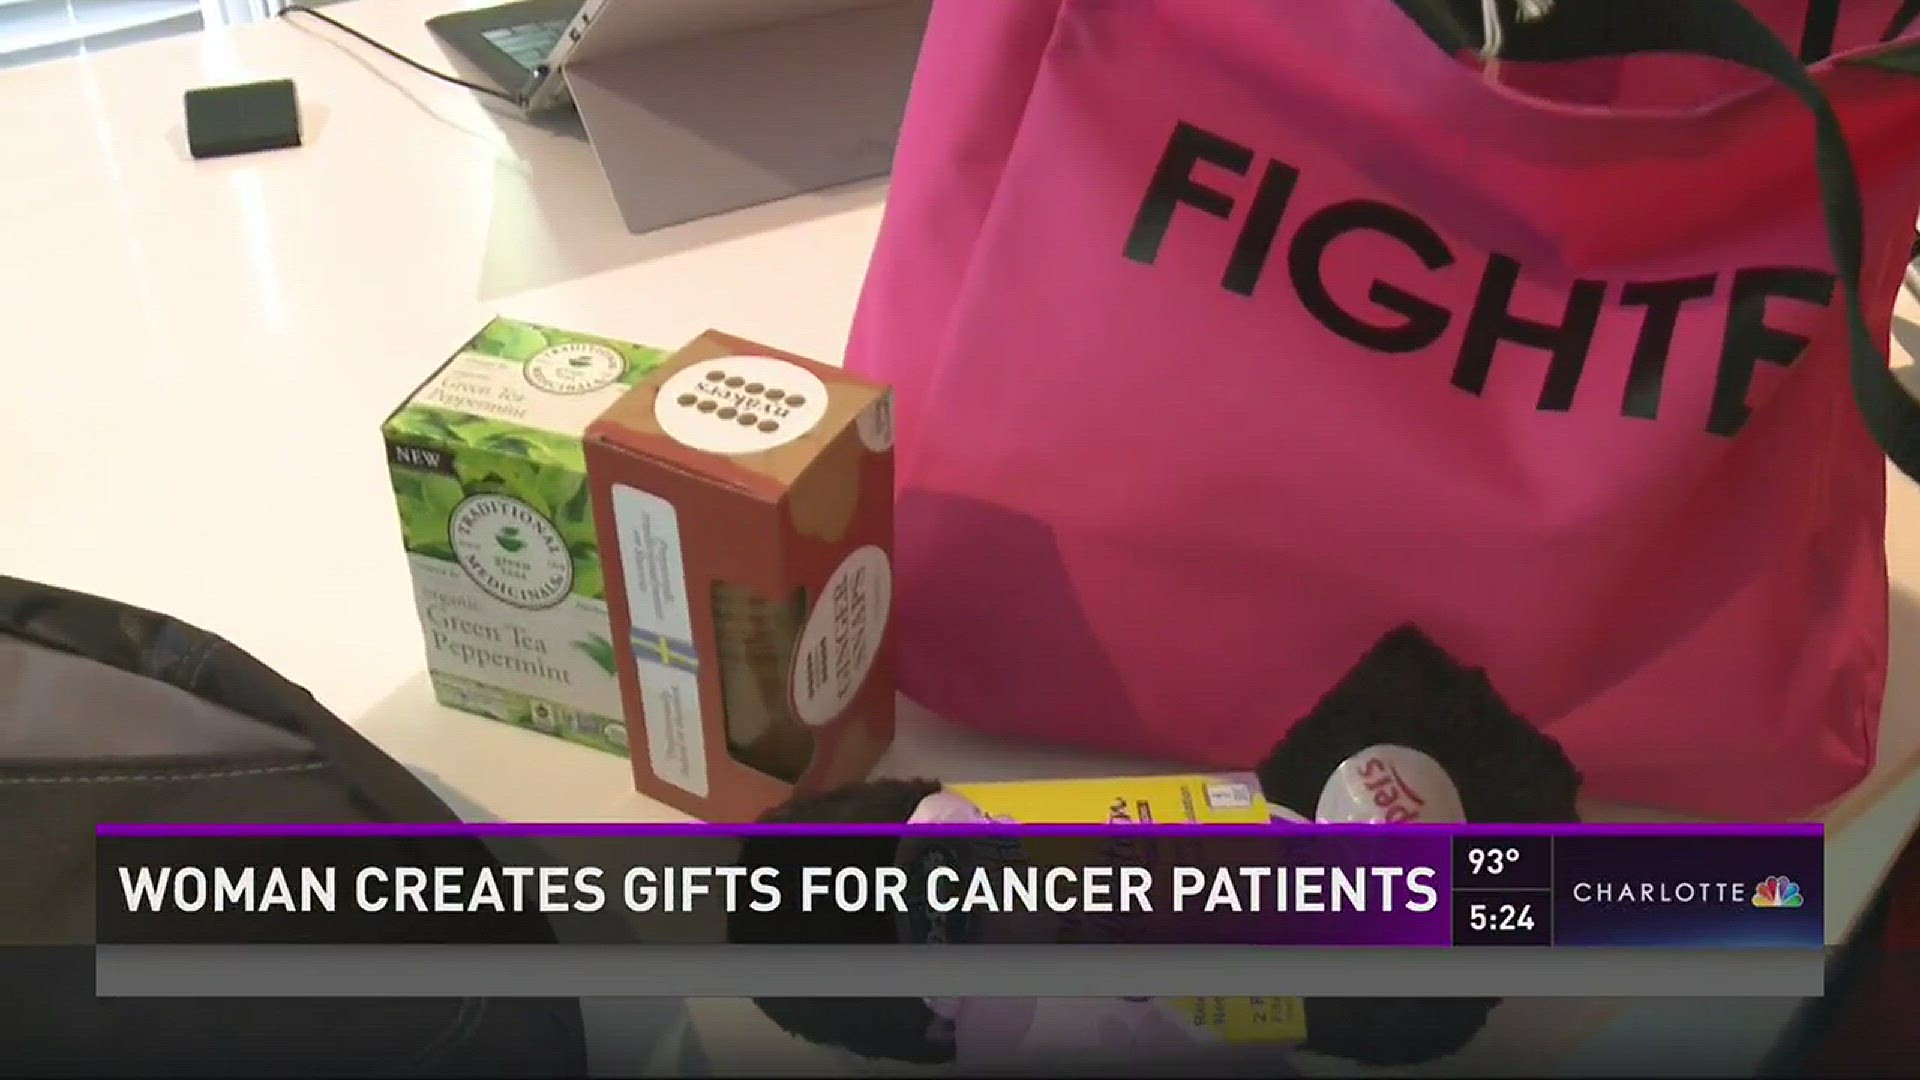 A local woman created a company that produces plenty of special and helpful gifts for cancer patients besides flowers.